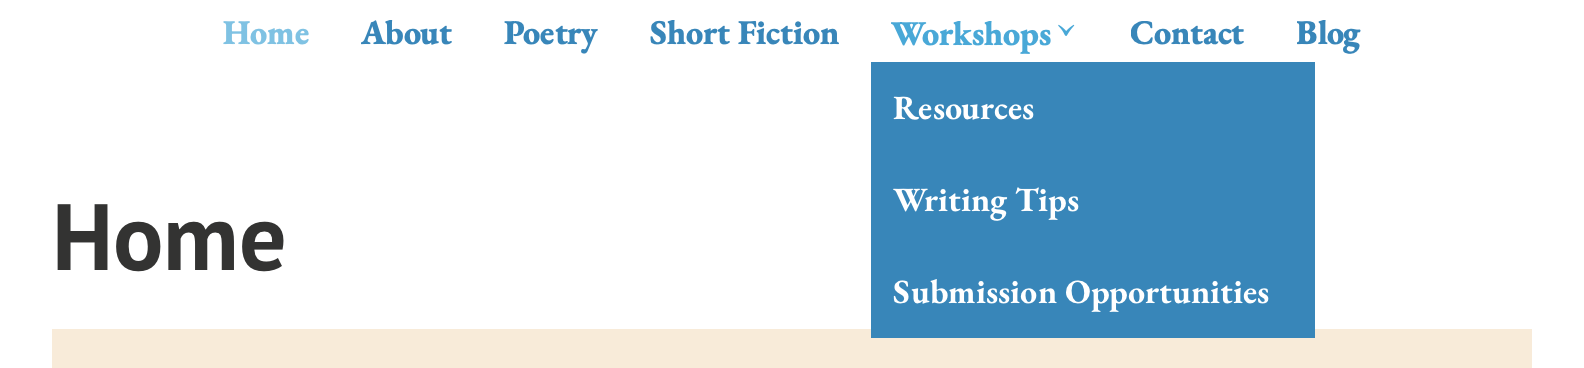 Screen shot of updated website menus (home, about, poetry, short fiction, workshops, contact, and blog)